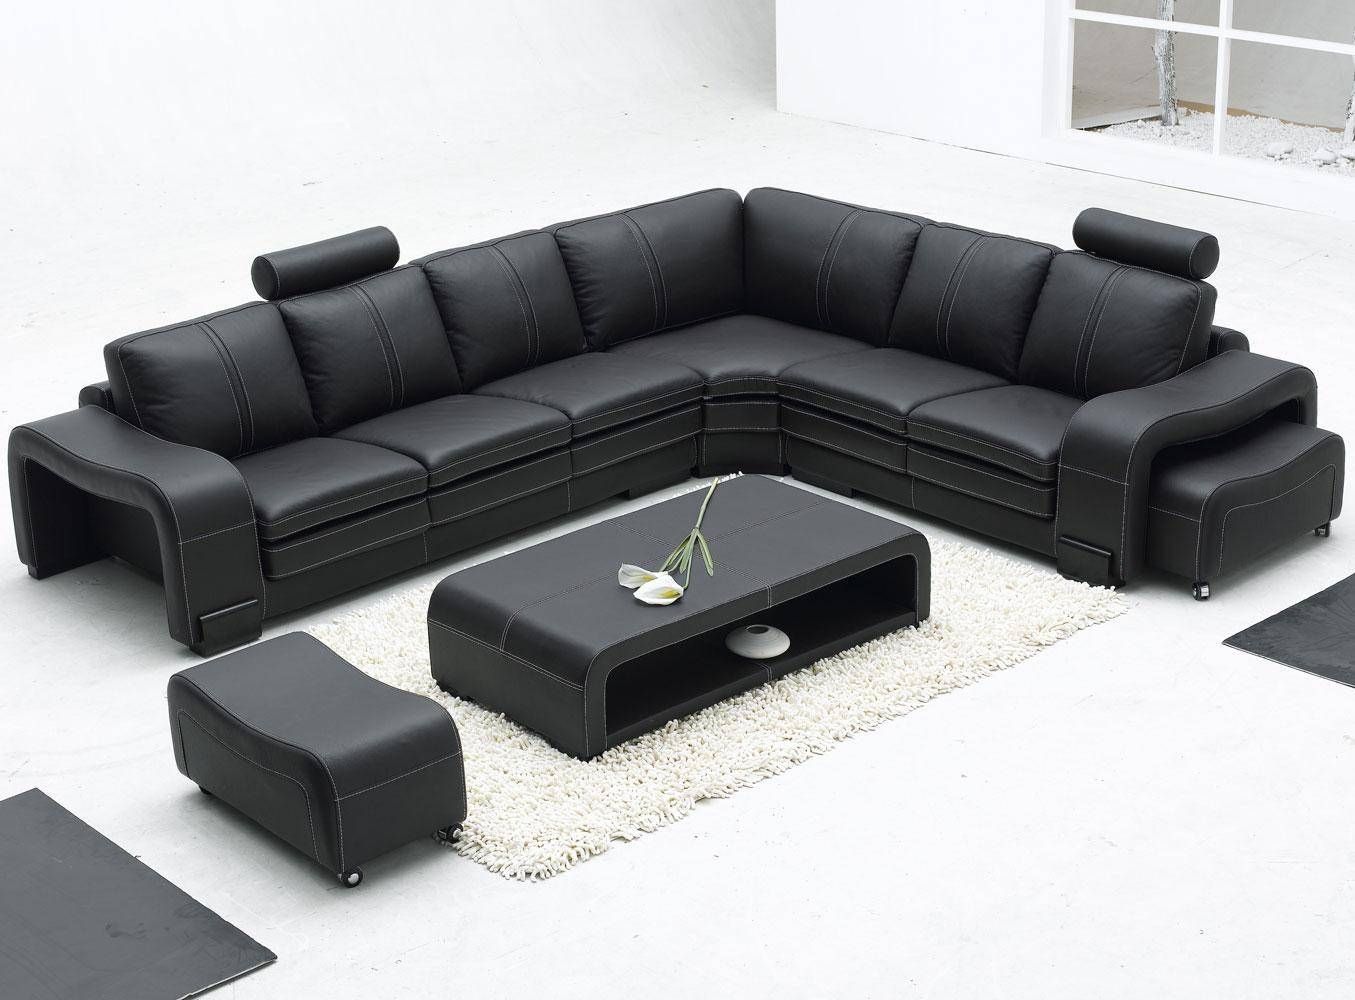 Furniture: Modern Bonded Leather Sectional Sofa In Black And Intended For Leather Modern Sectional Sofas (View 4 of 15)